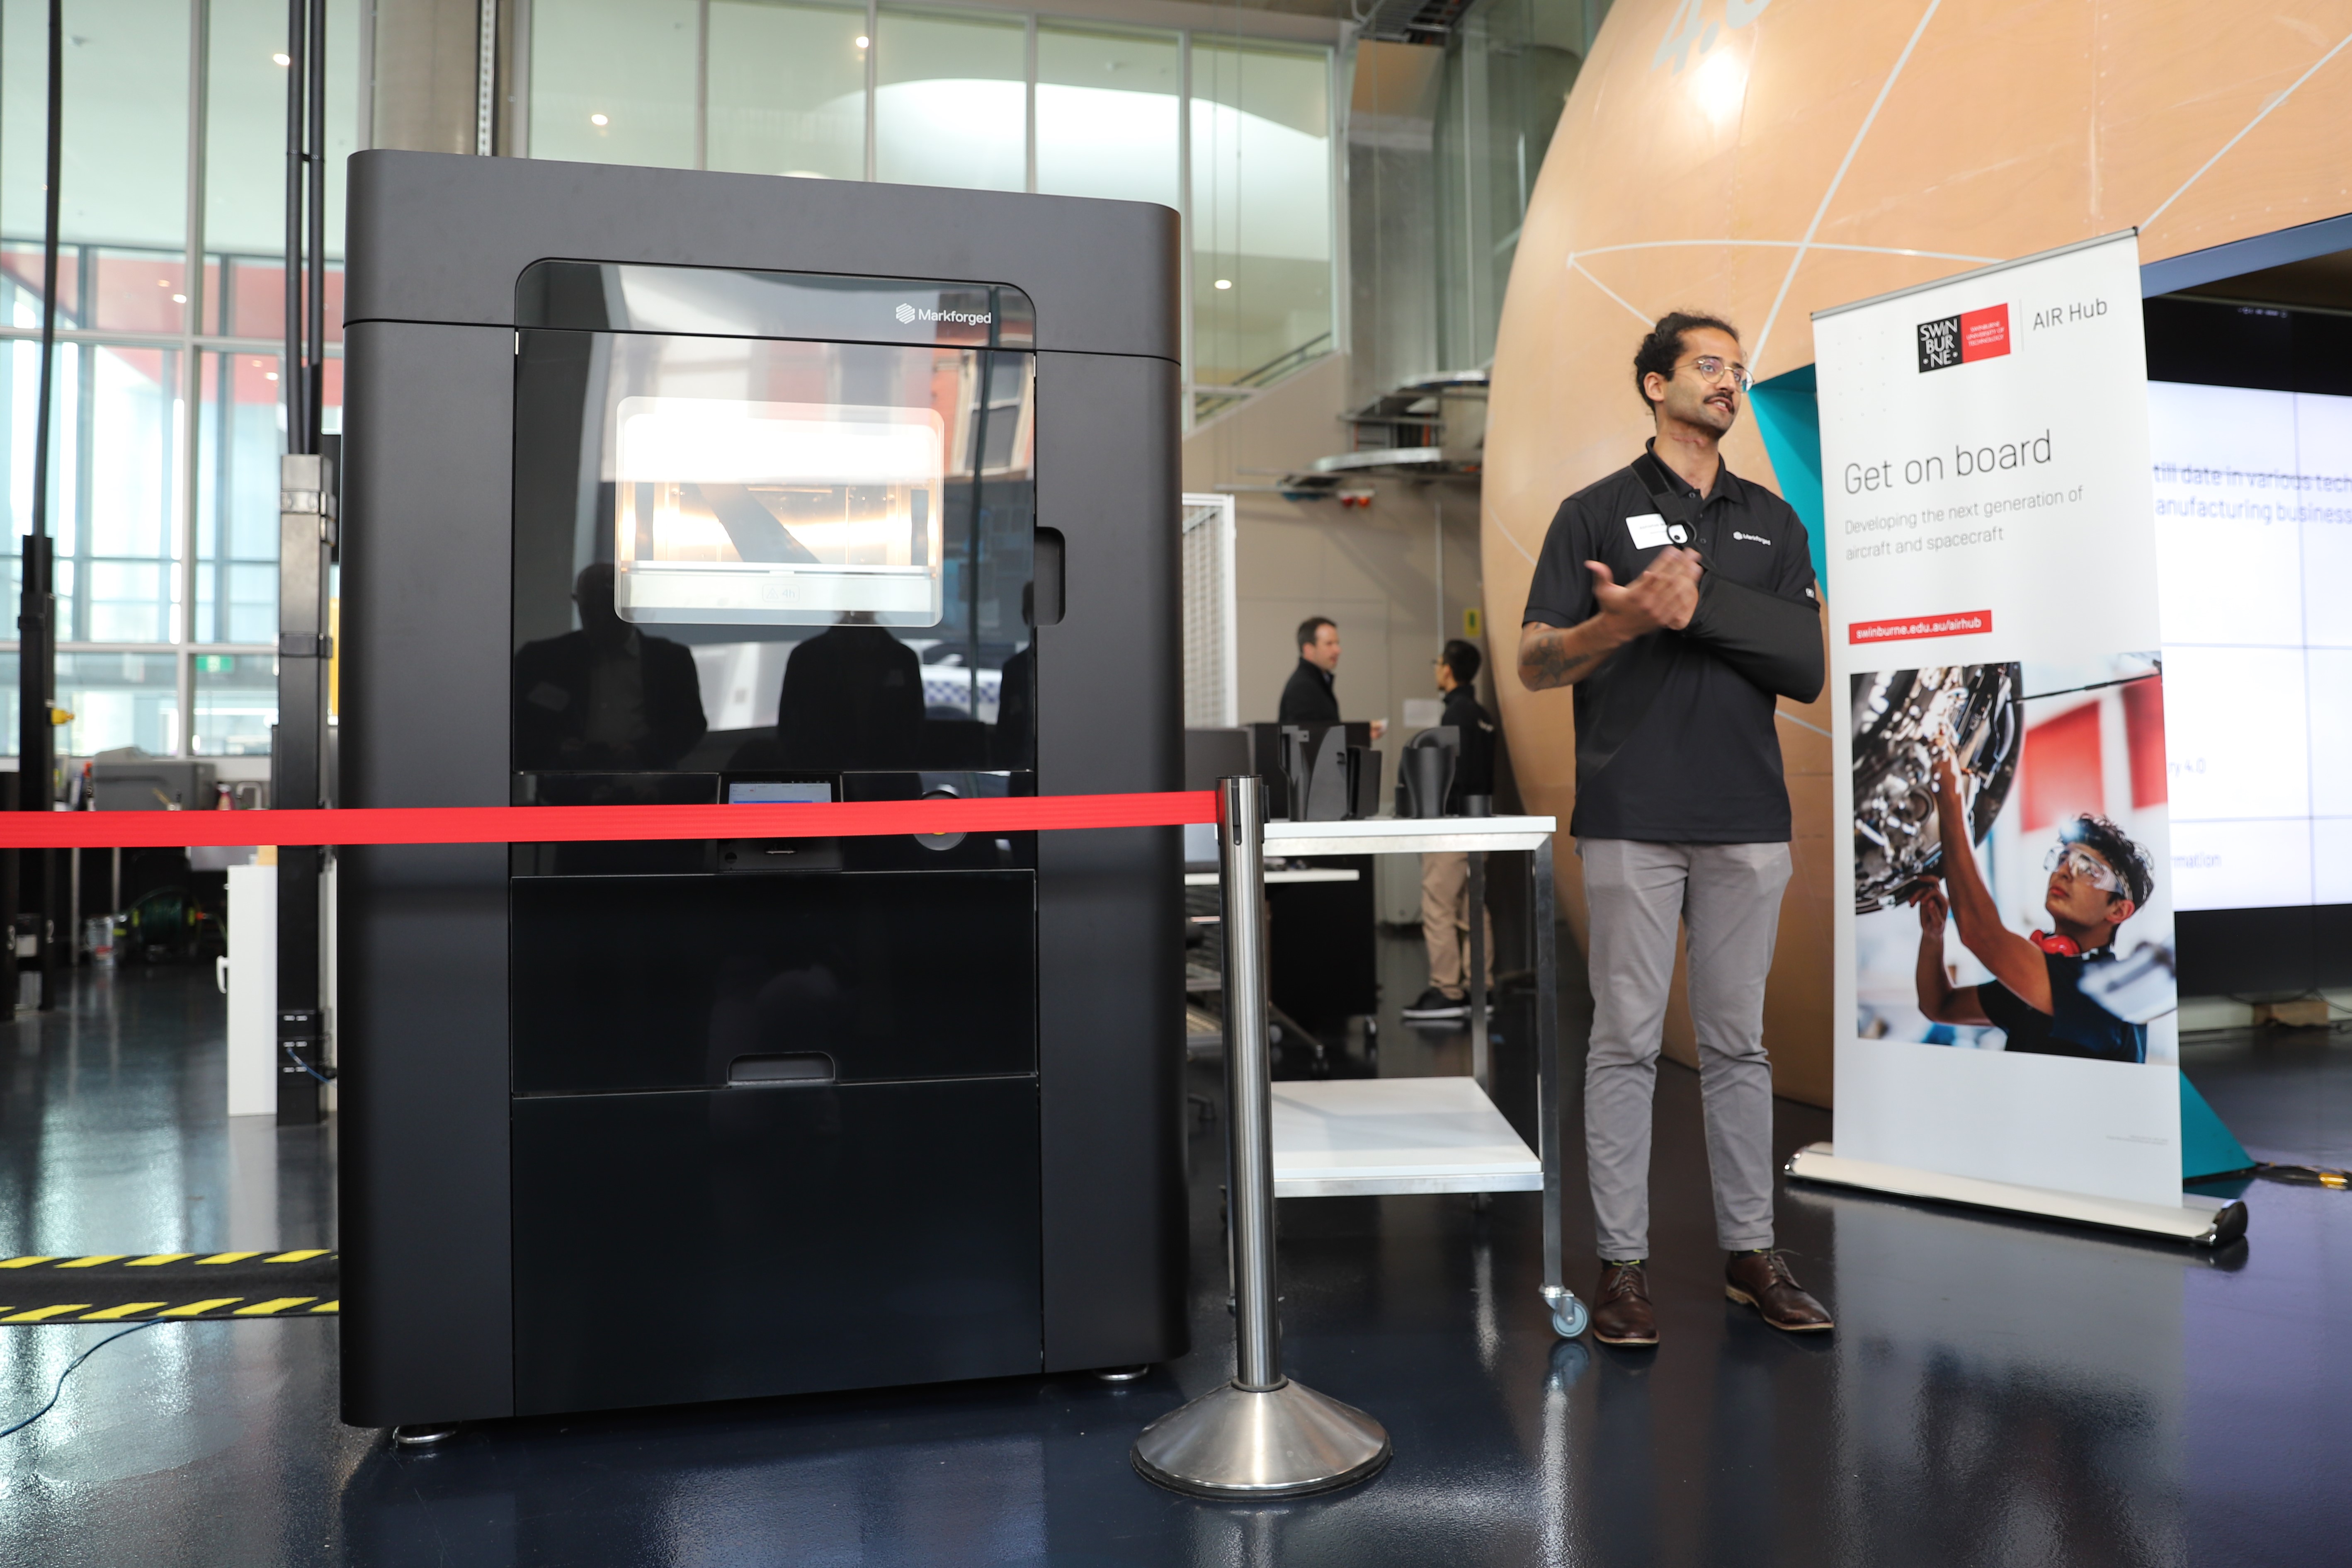 A large black 3D printer stands beside a man presenting